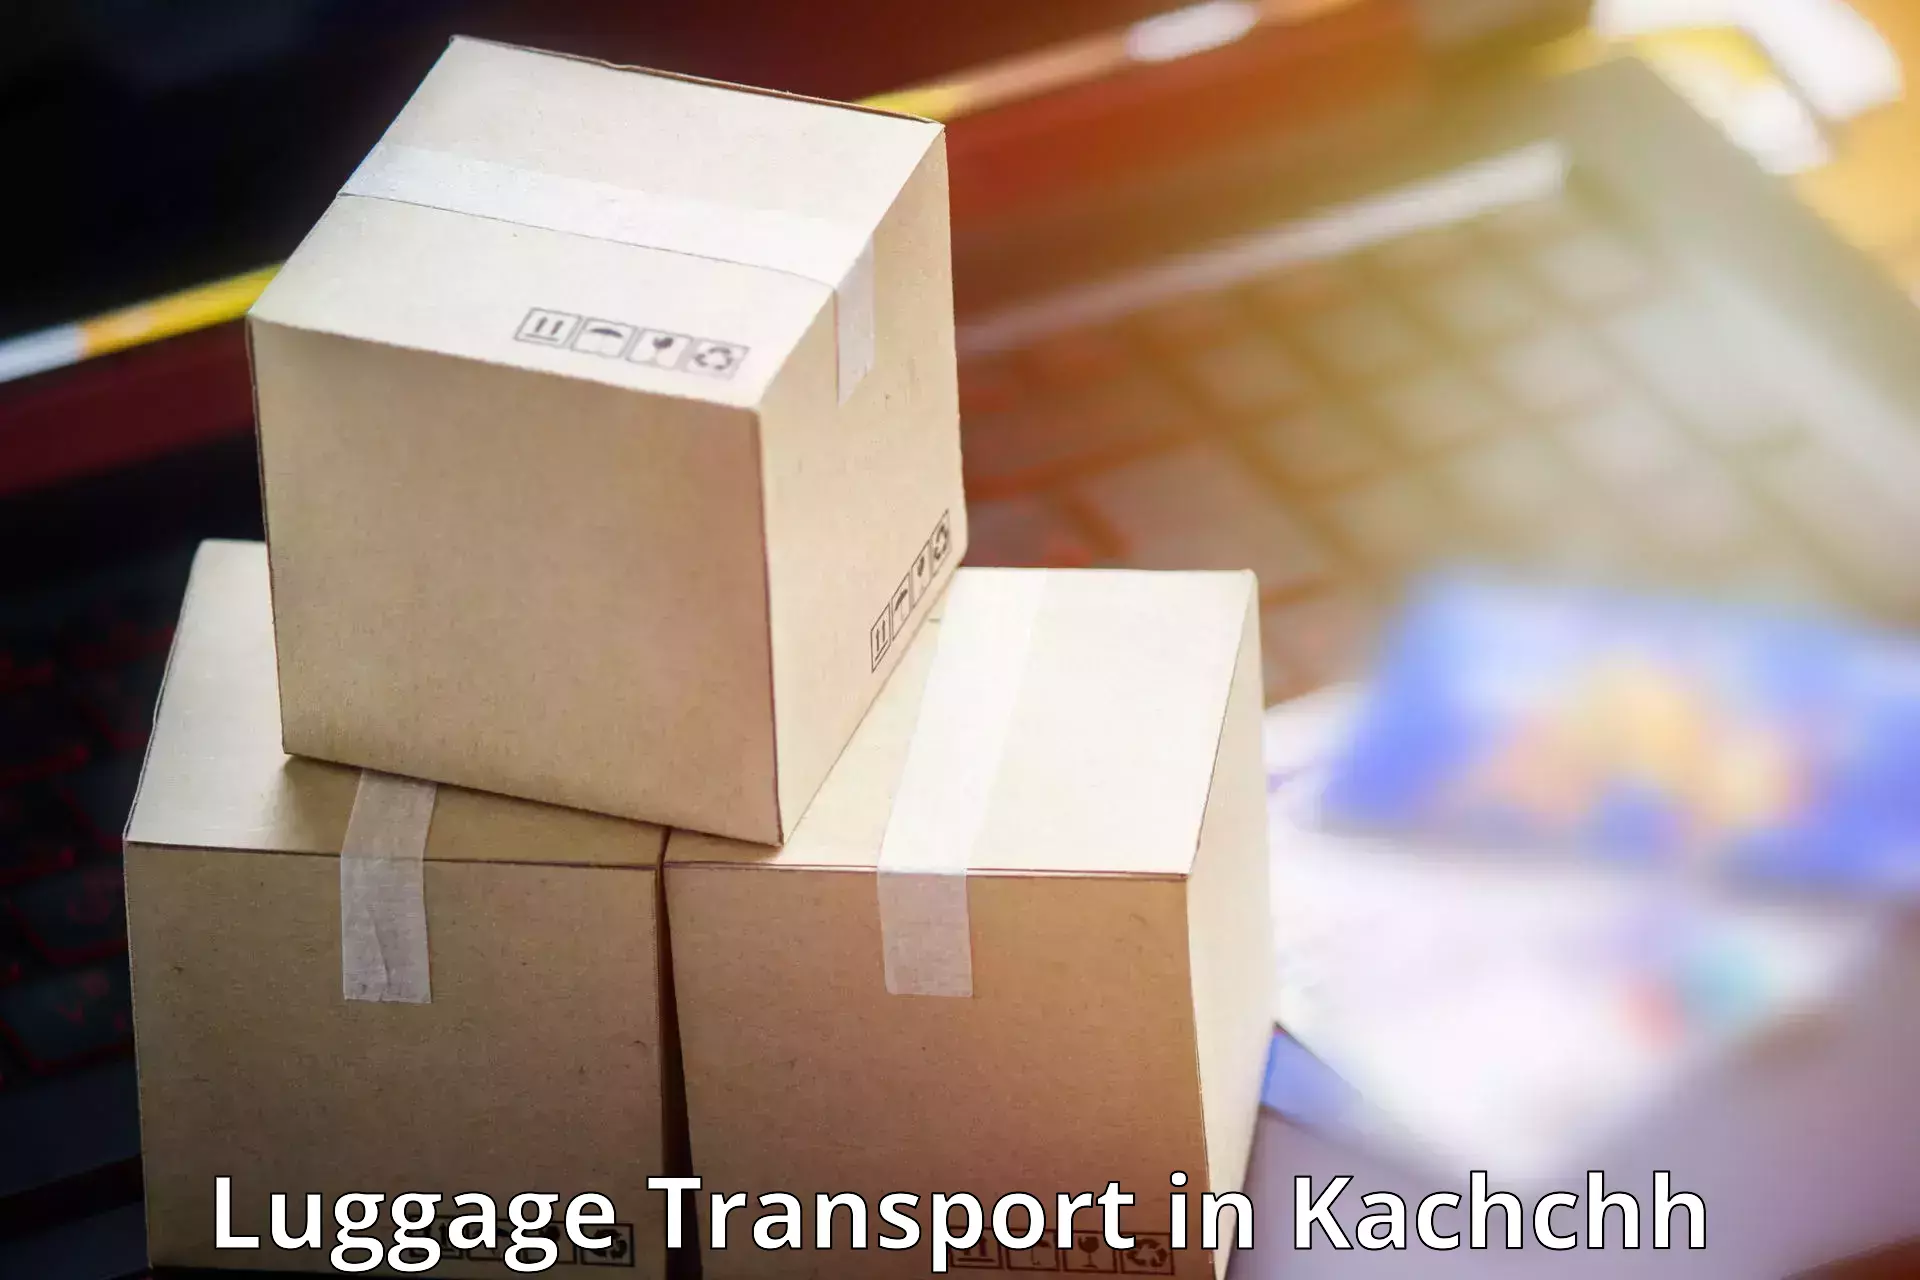 Baggage relocation service in Kachchh